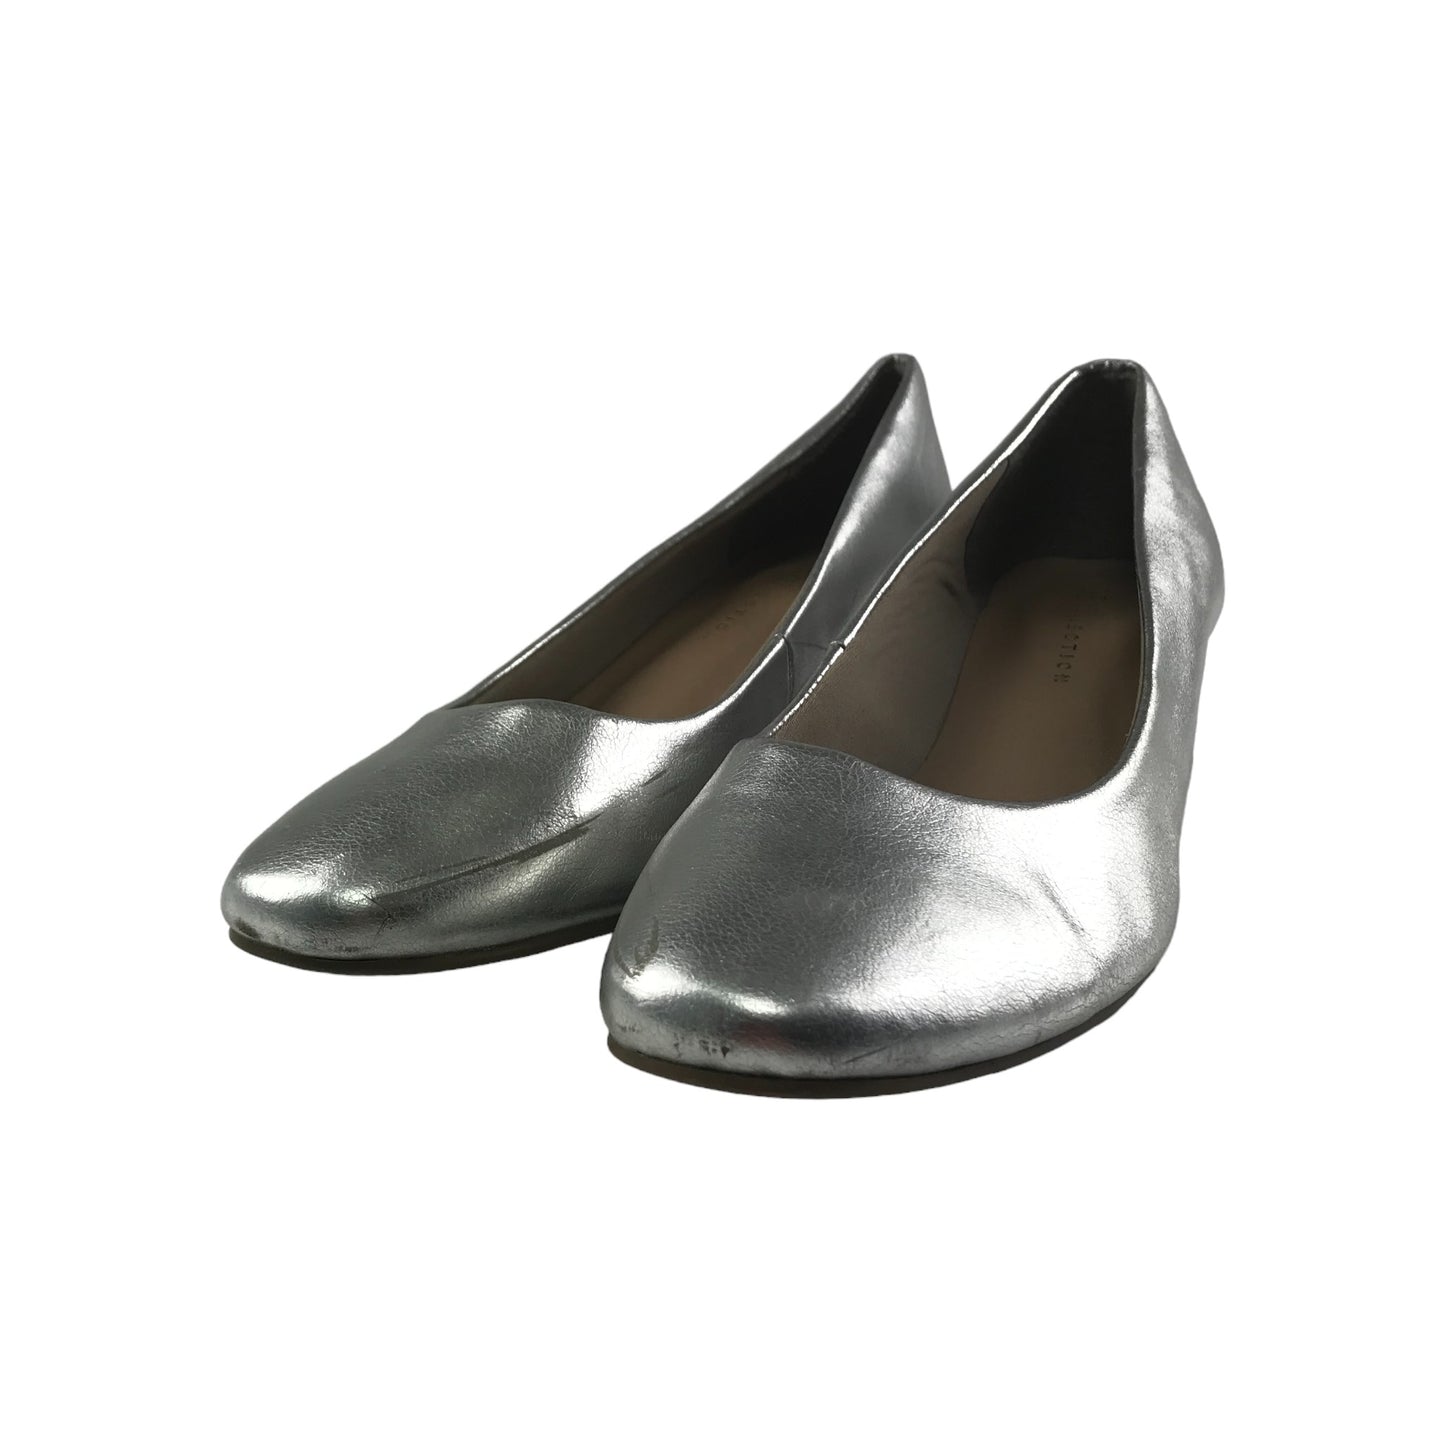 M&S Insolia Low Heel Shoes Shoe Size 5.5 Silver Shiny Hunky Heel